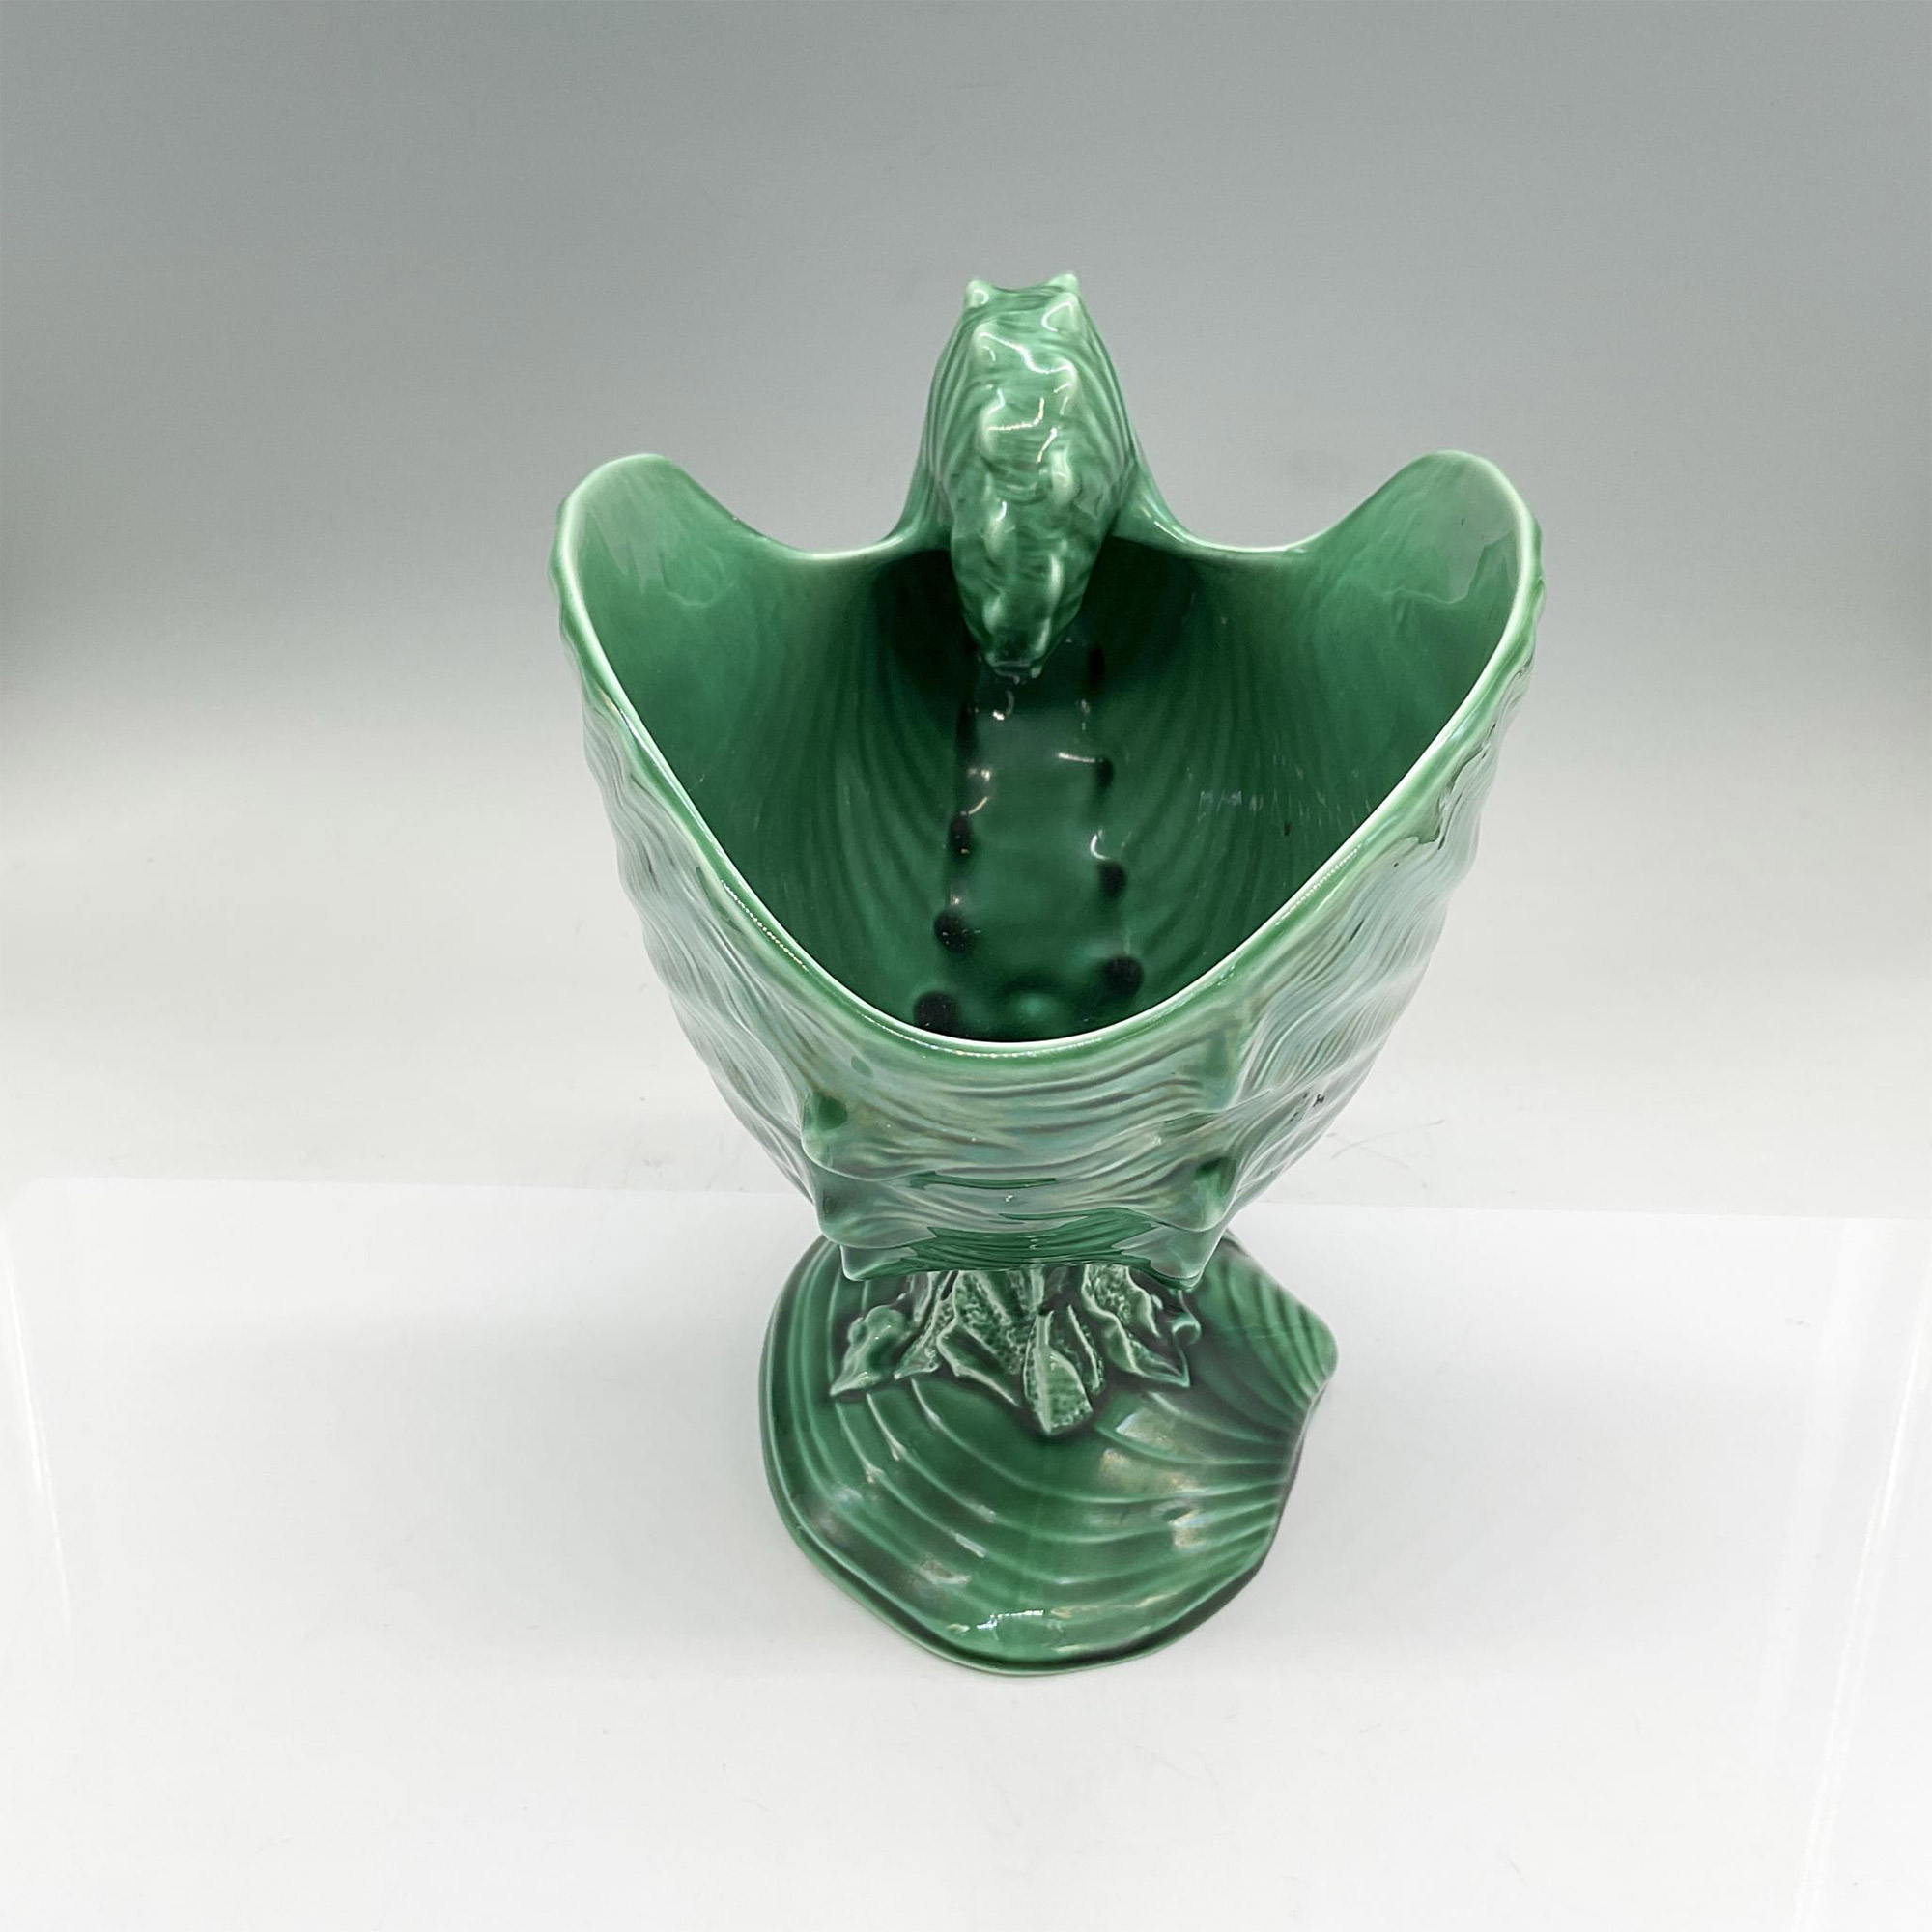 2pc Wedgwood of Etruria Green Glazed Footed Bowl + Plate - Image 3 of 6